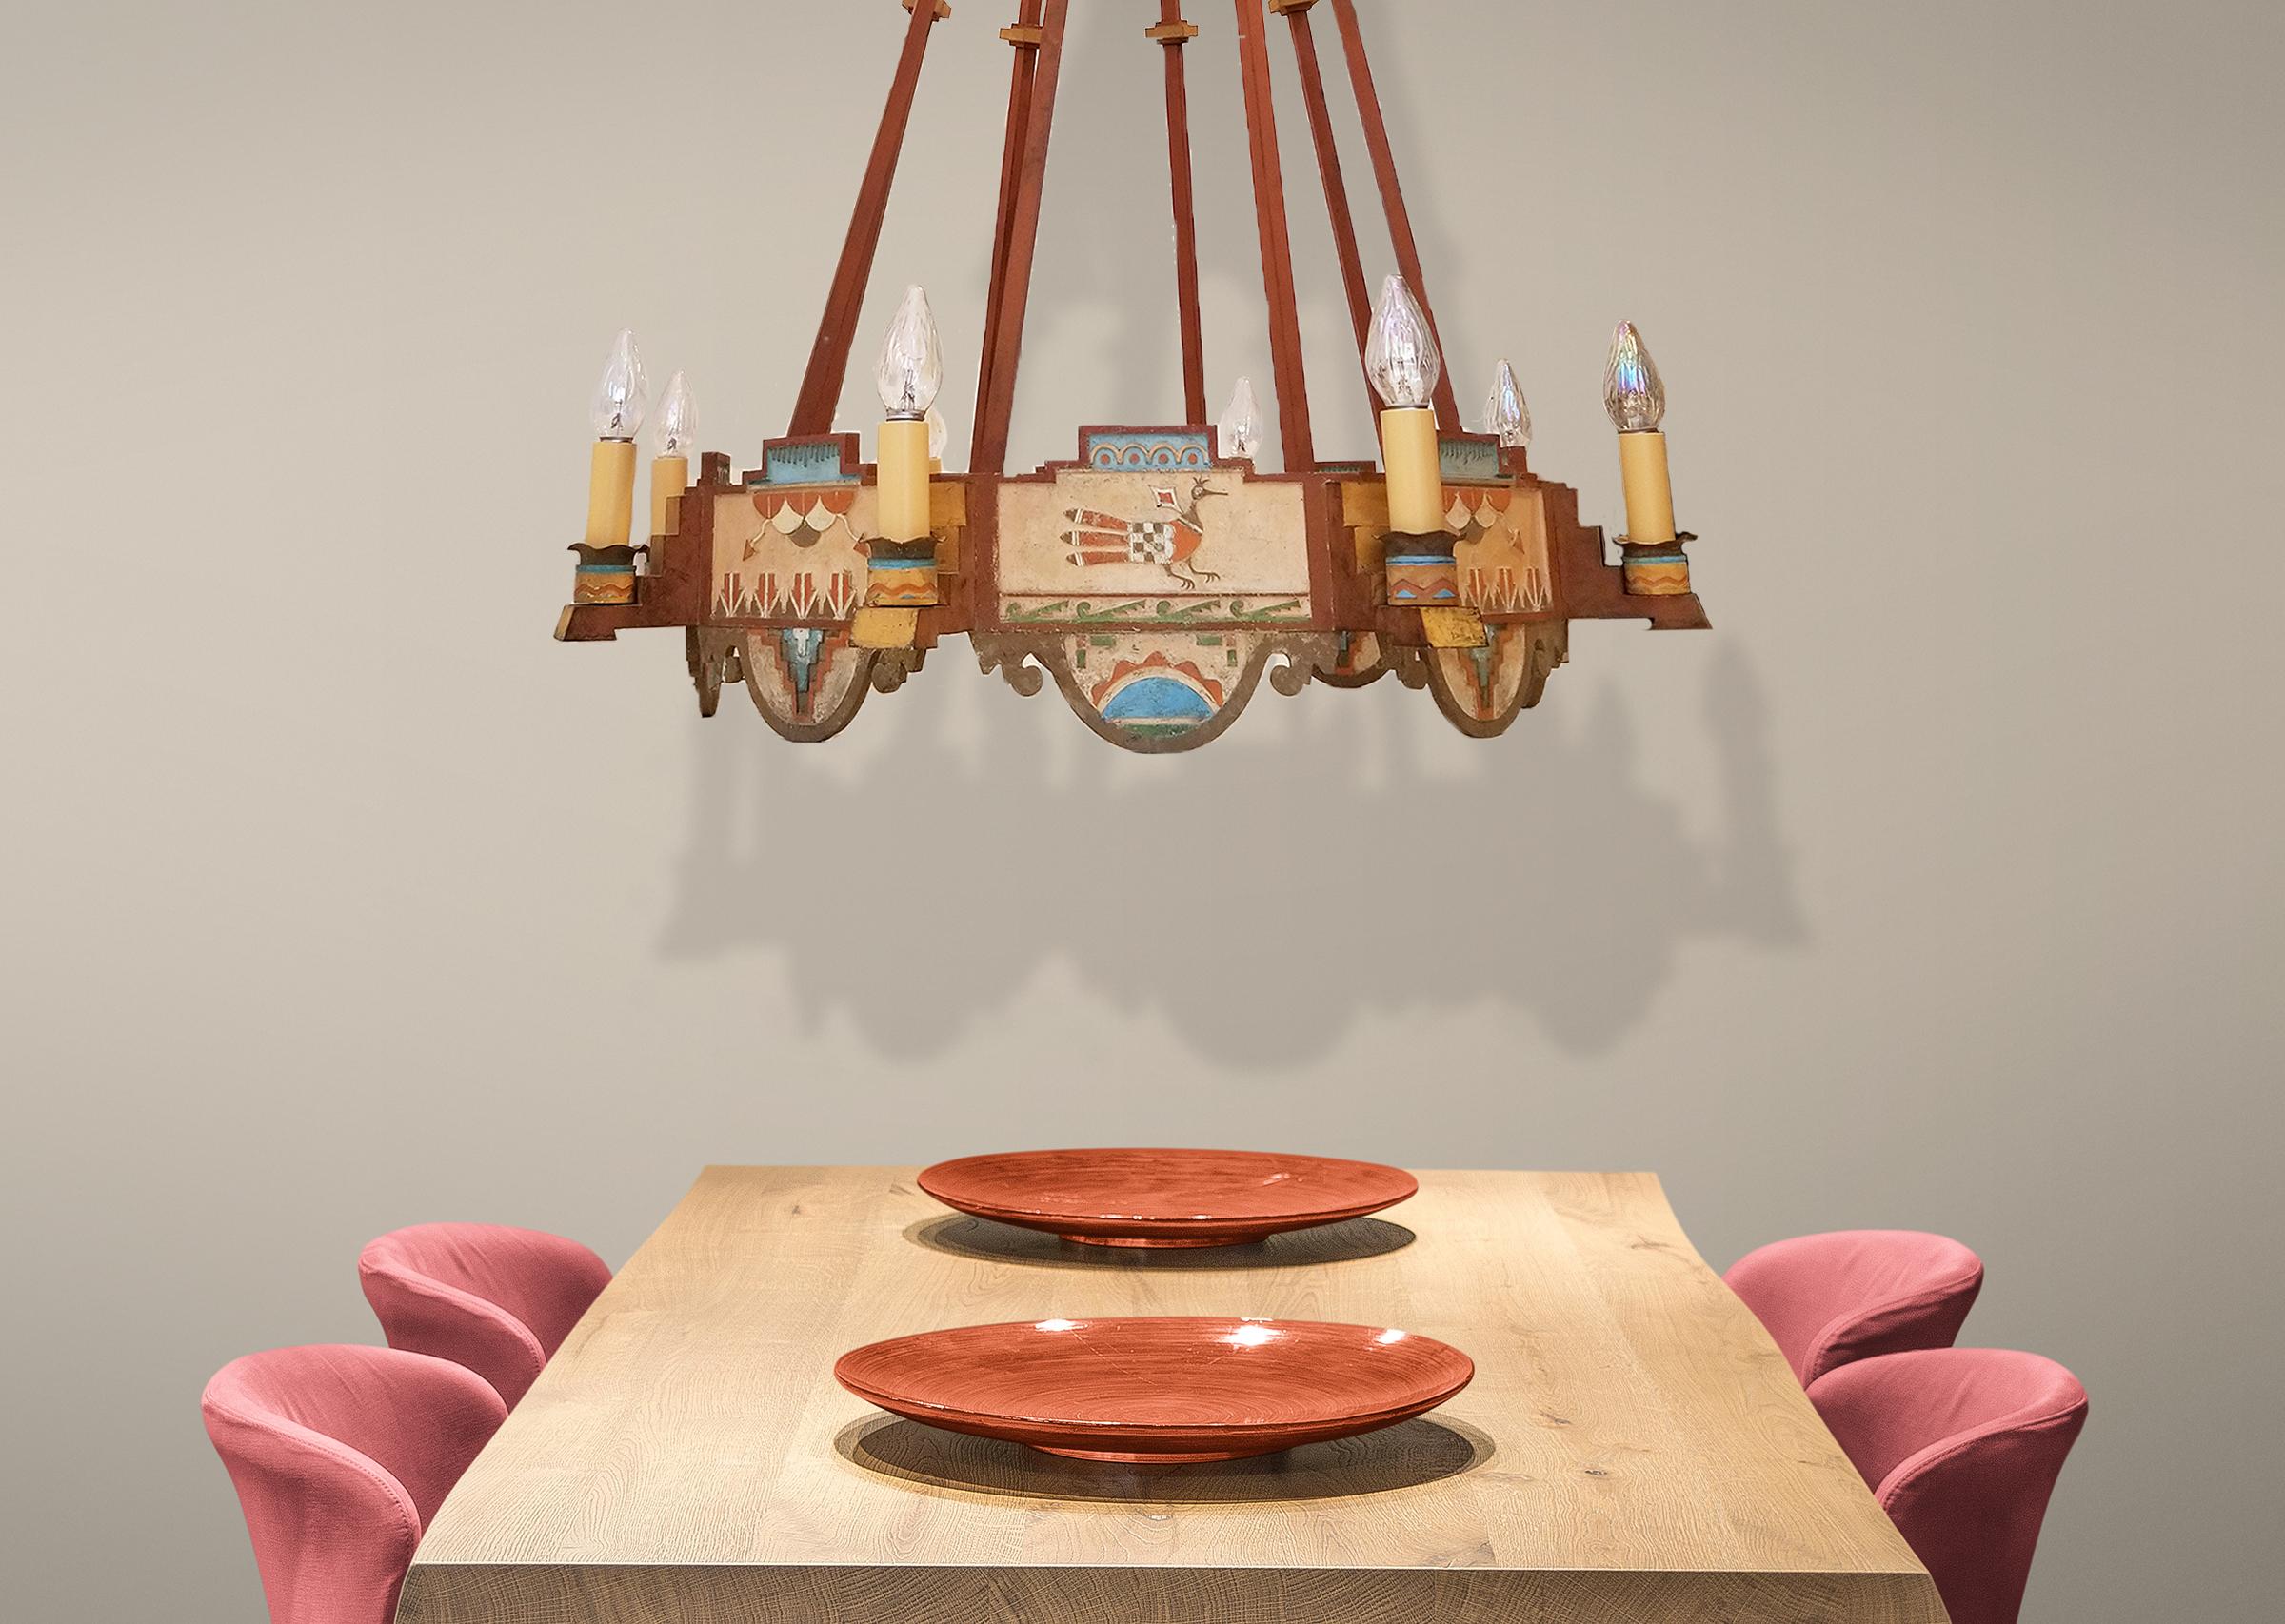 Southwest Chandelier from circa 1930s. Originally hung in the Hilton Hotel in Albuquerque, New Mexico which was built in 1939. At the time, this was the fourth hotel Conrad Hilton built and the first hotel Conrad Hilton built in his native New